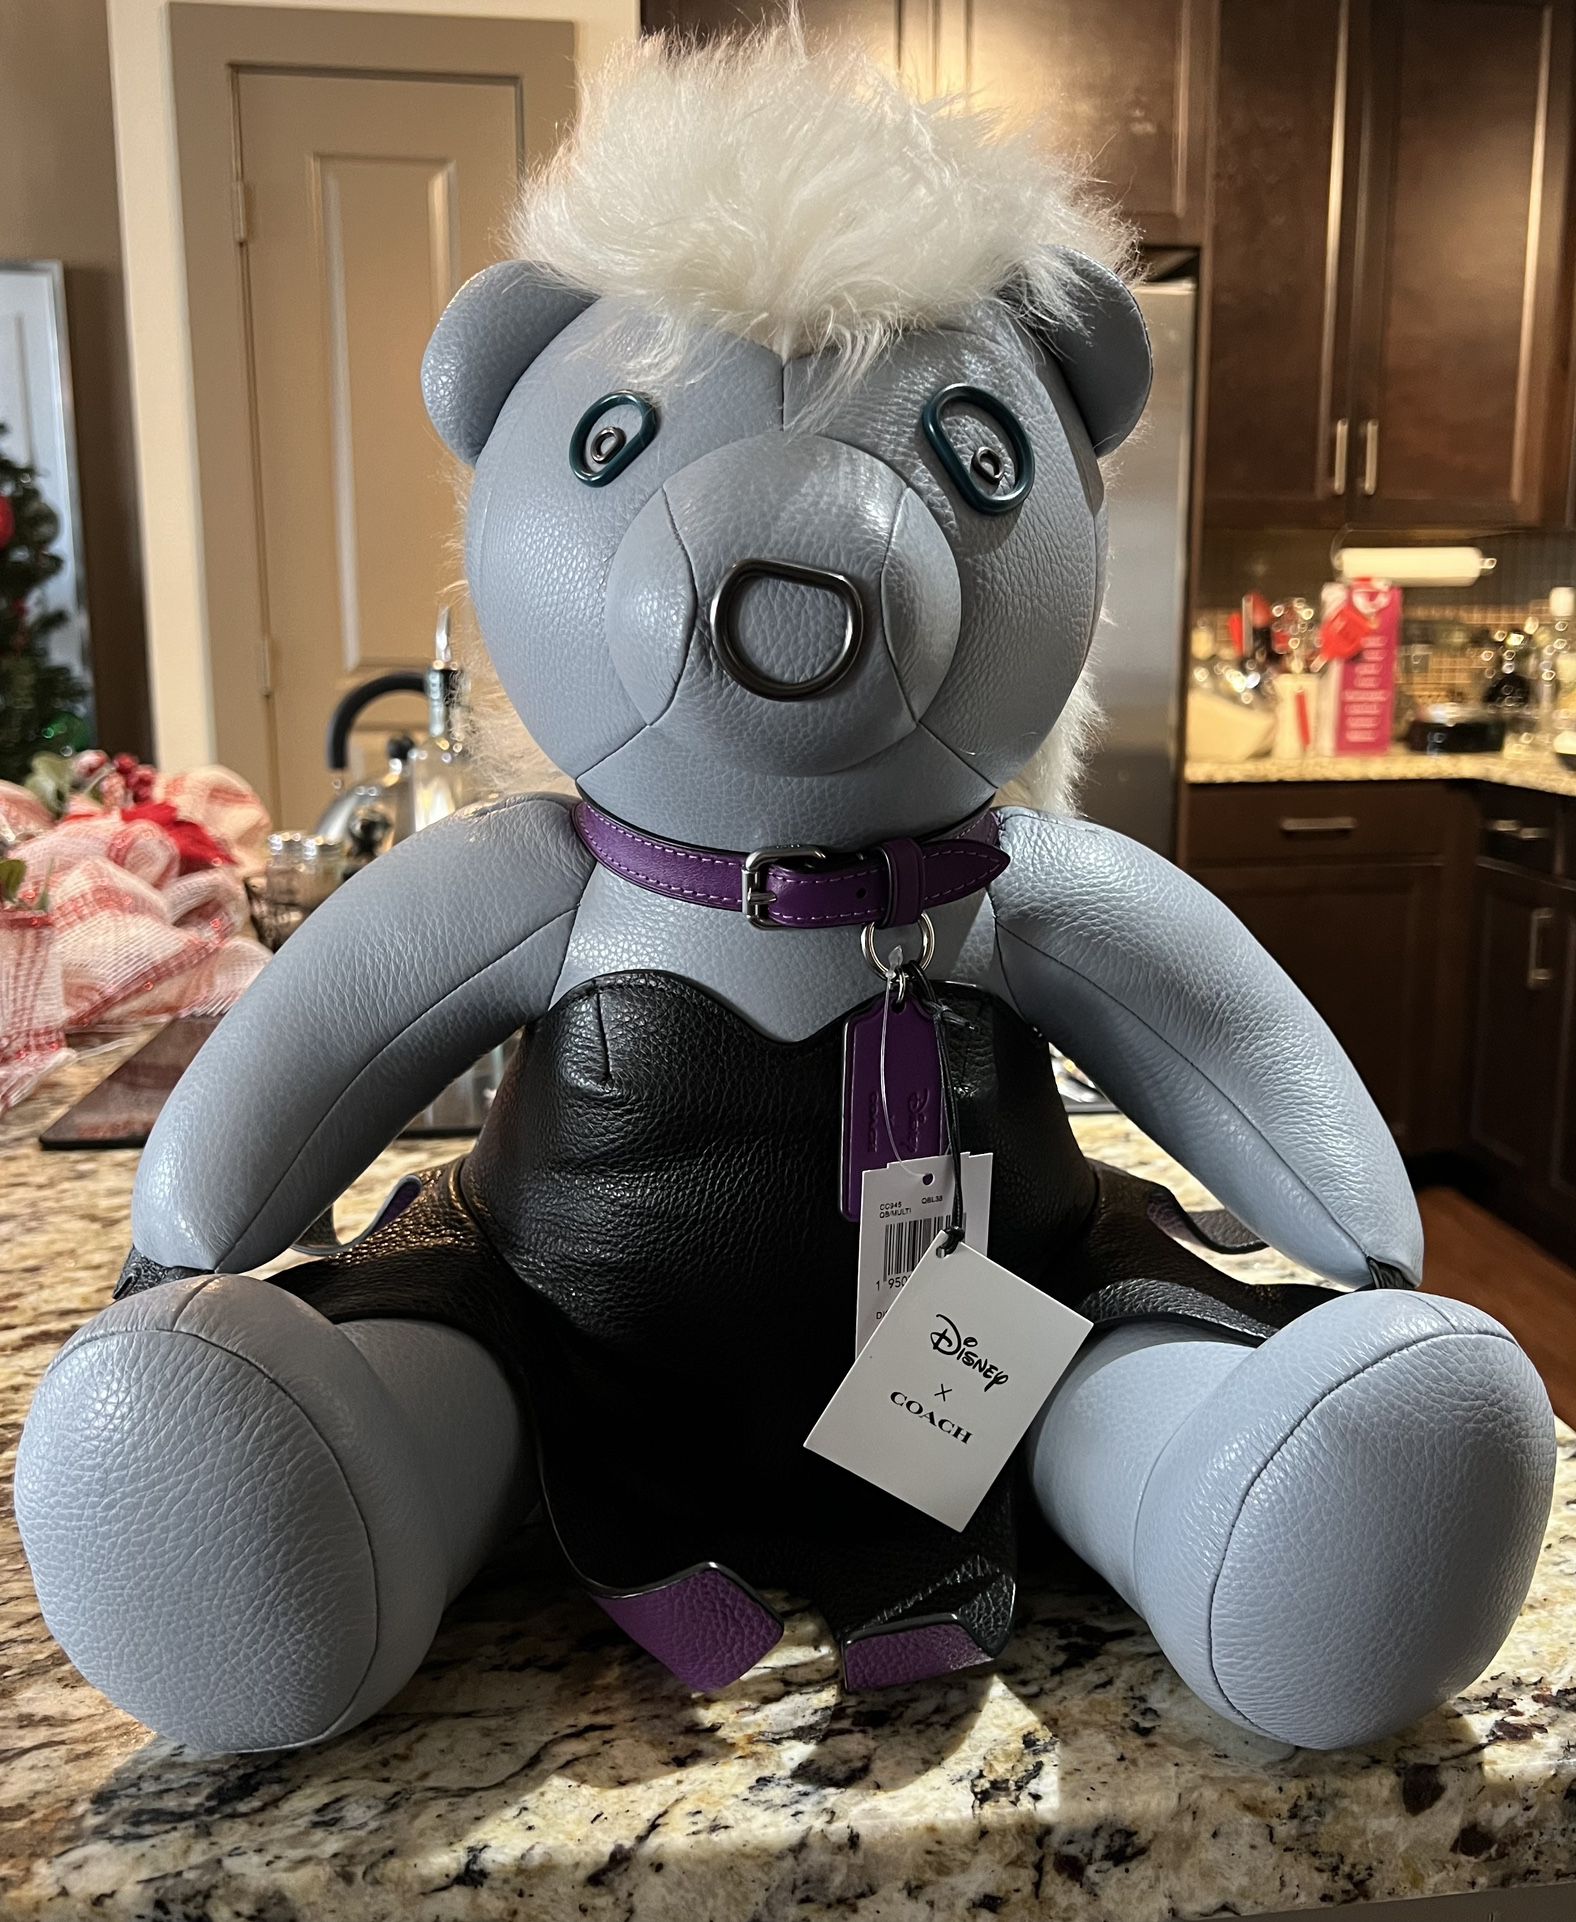 Coach Villains Ursula Bear for Sale in Fort Worth, TX - OfferUp